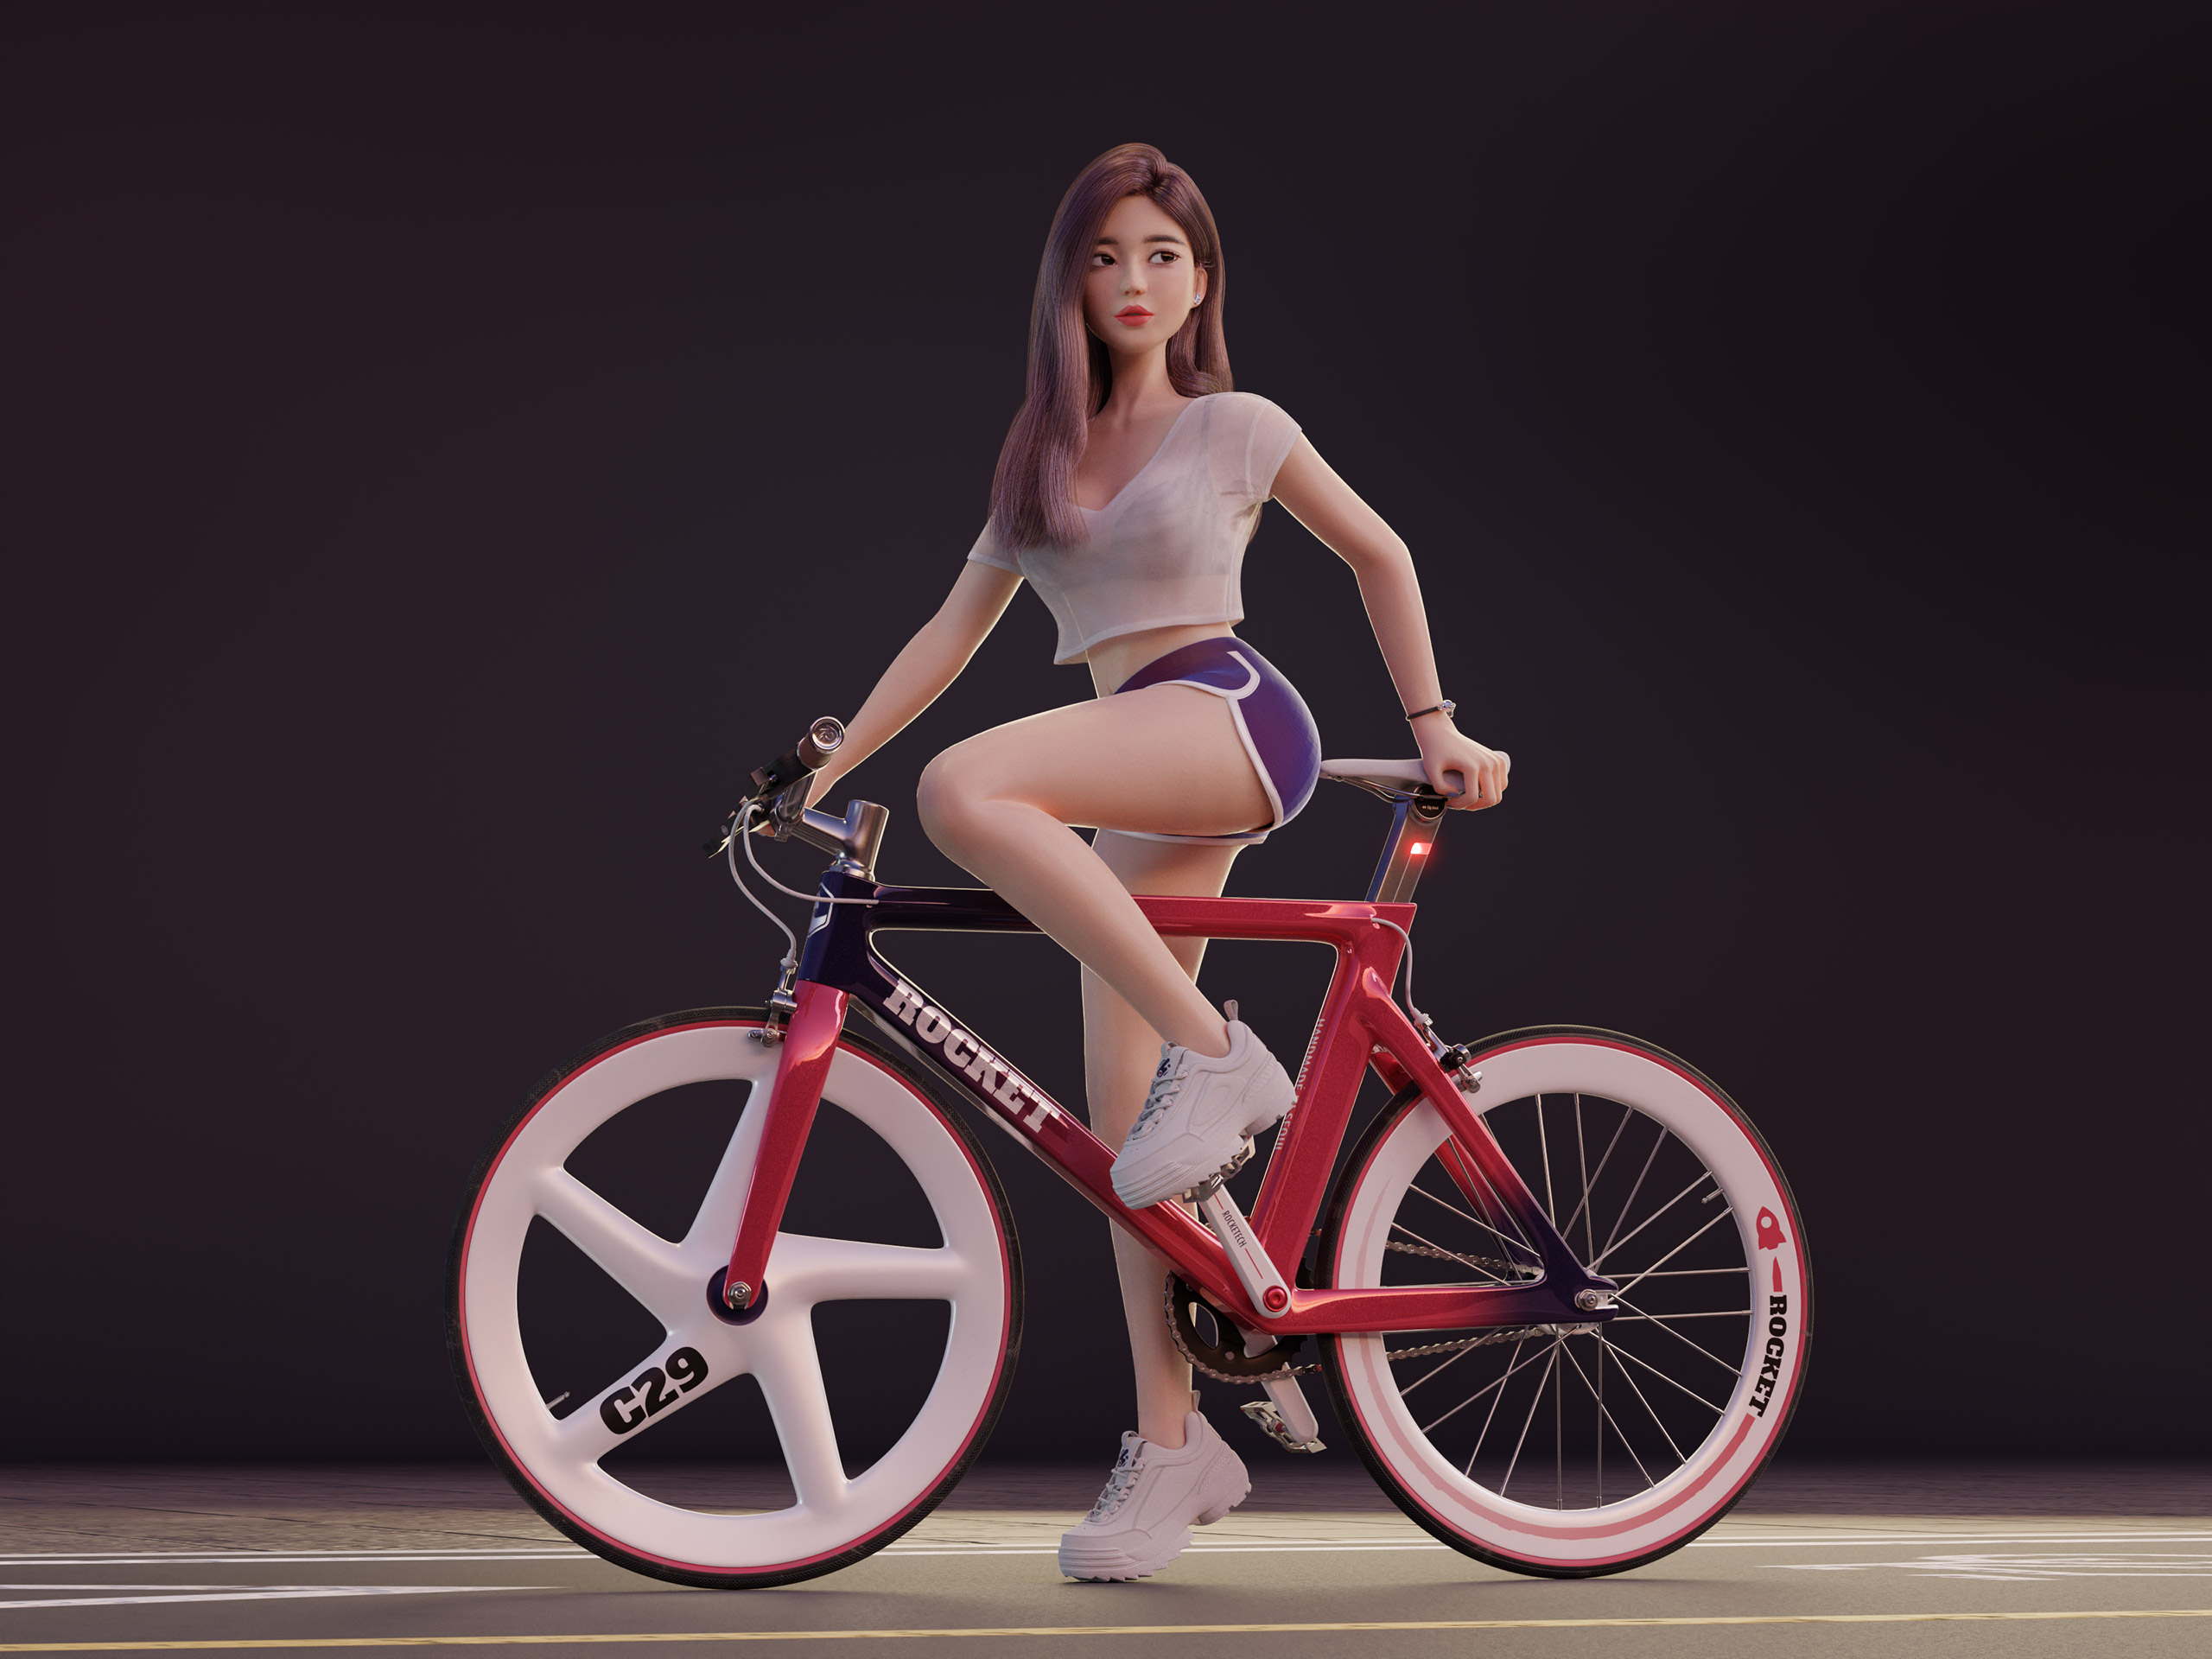 A Girl Riding a Red Bicycle